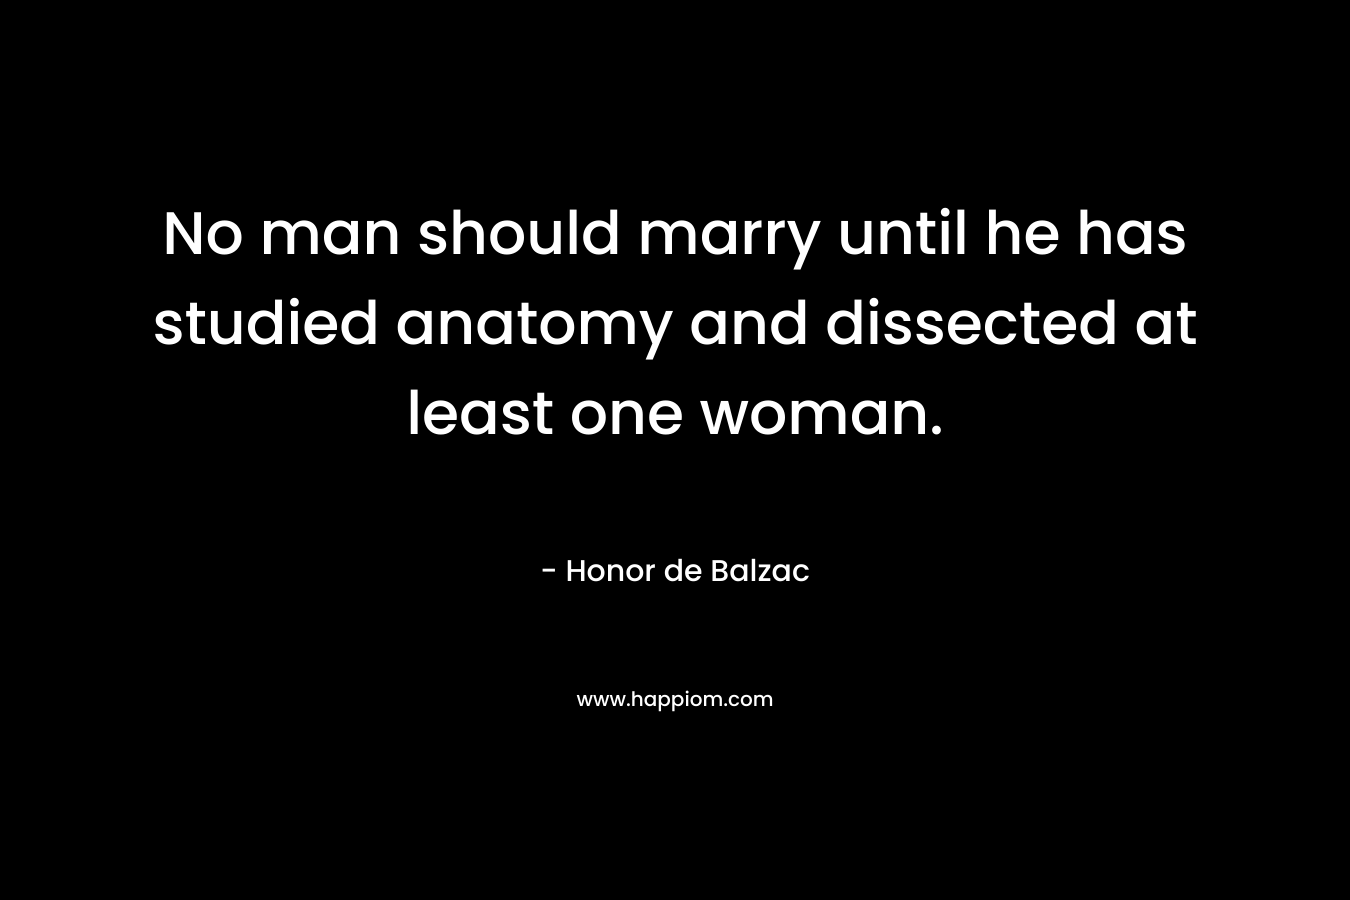 No man should marry until he has studied anatomy and dissected at least one woman.